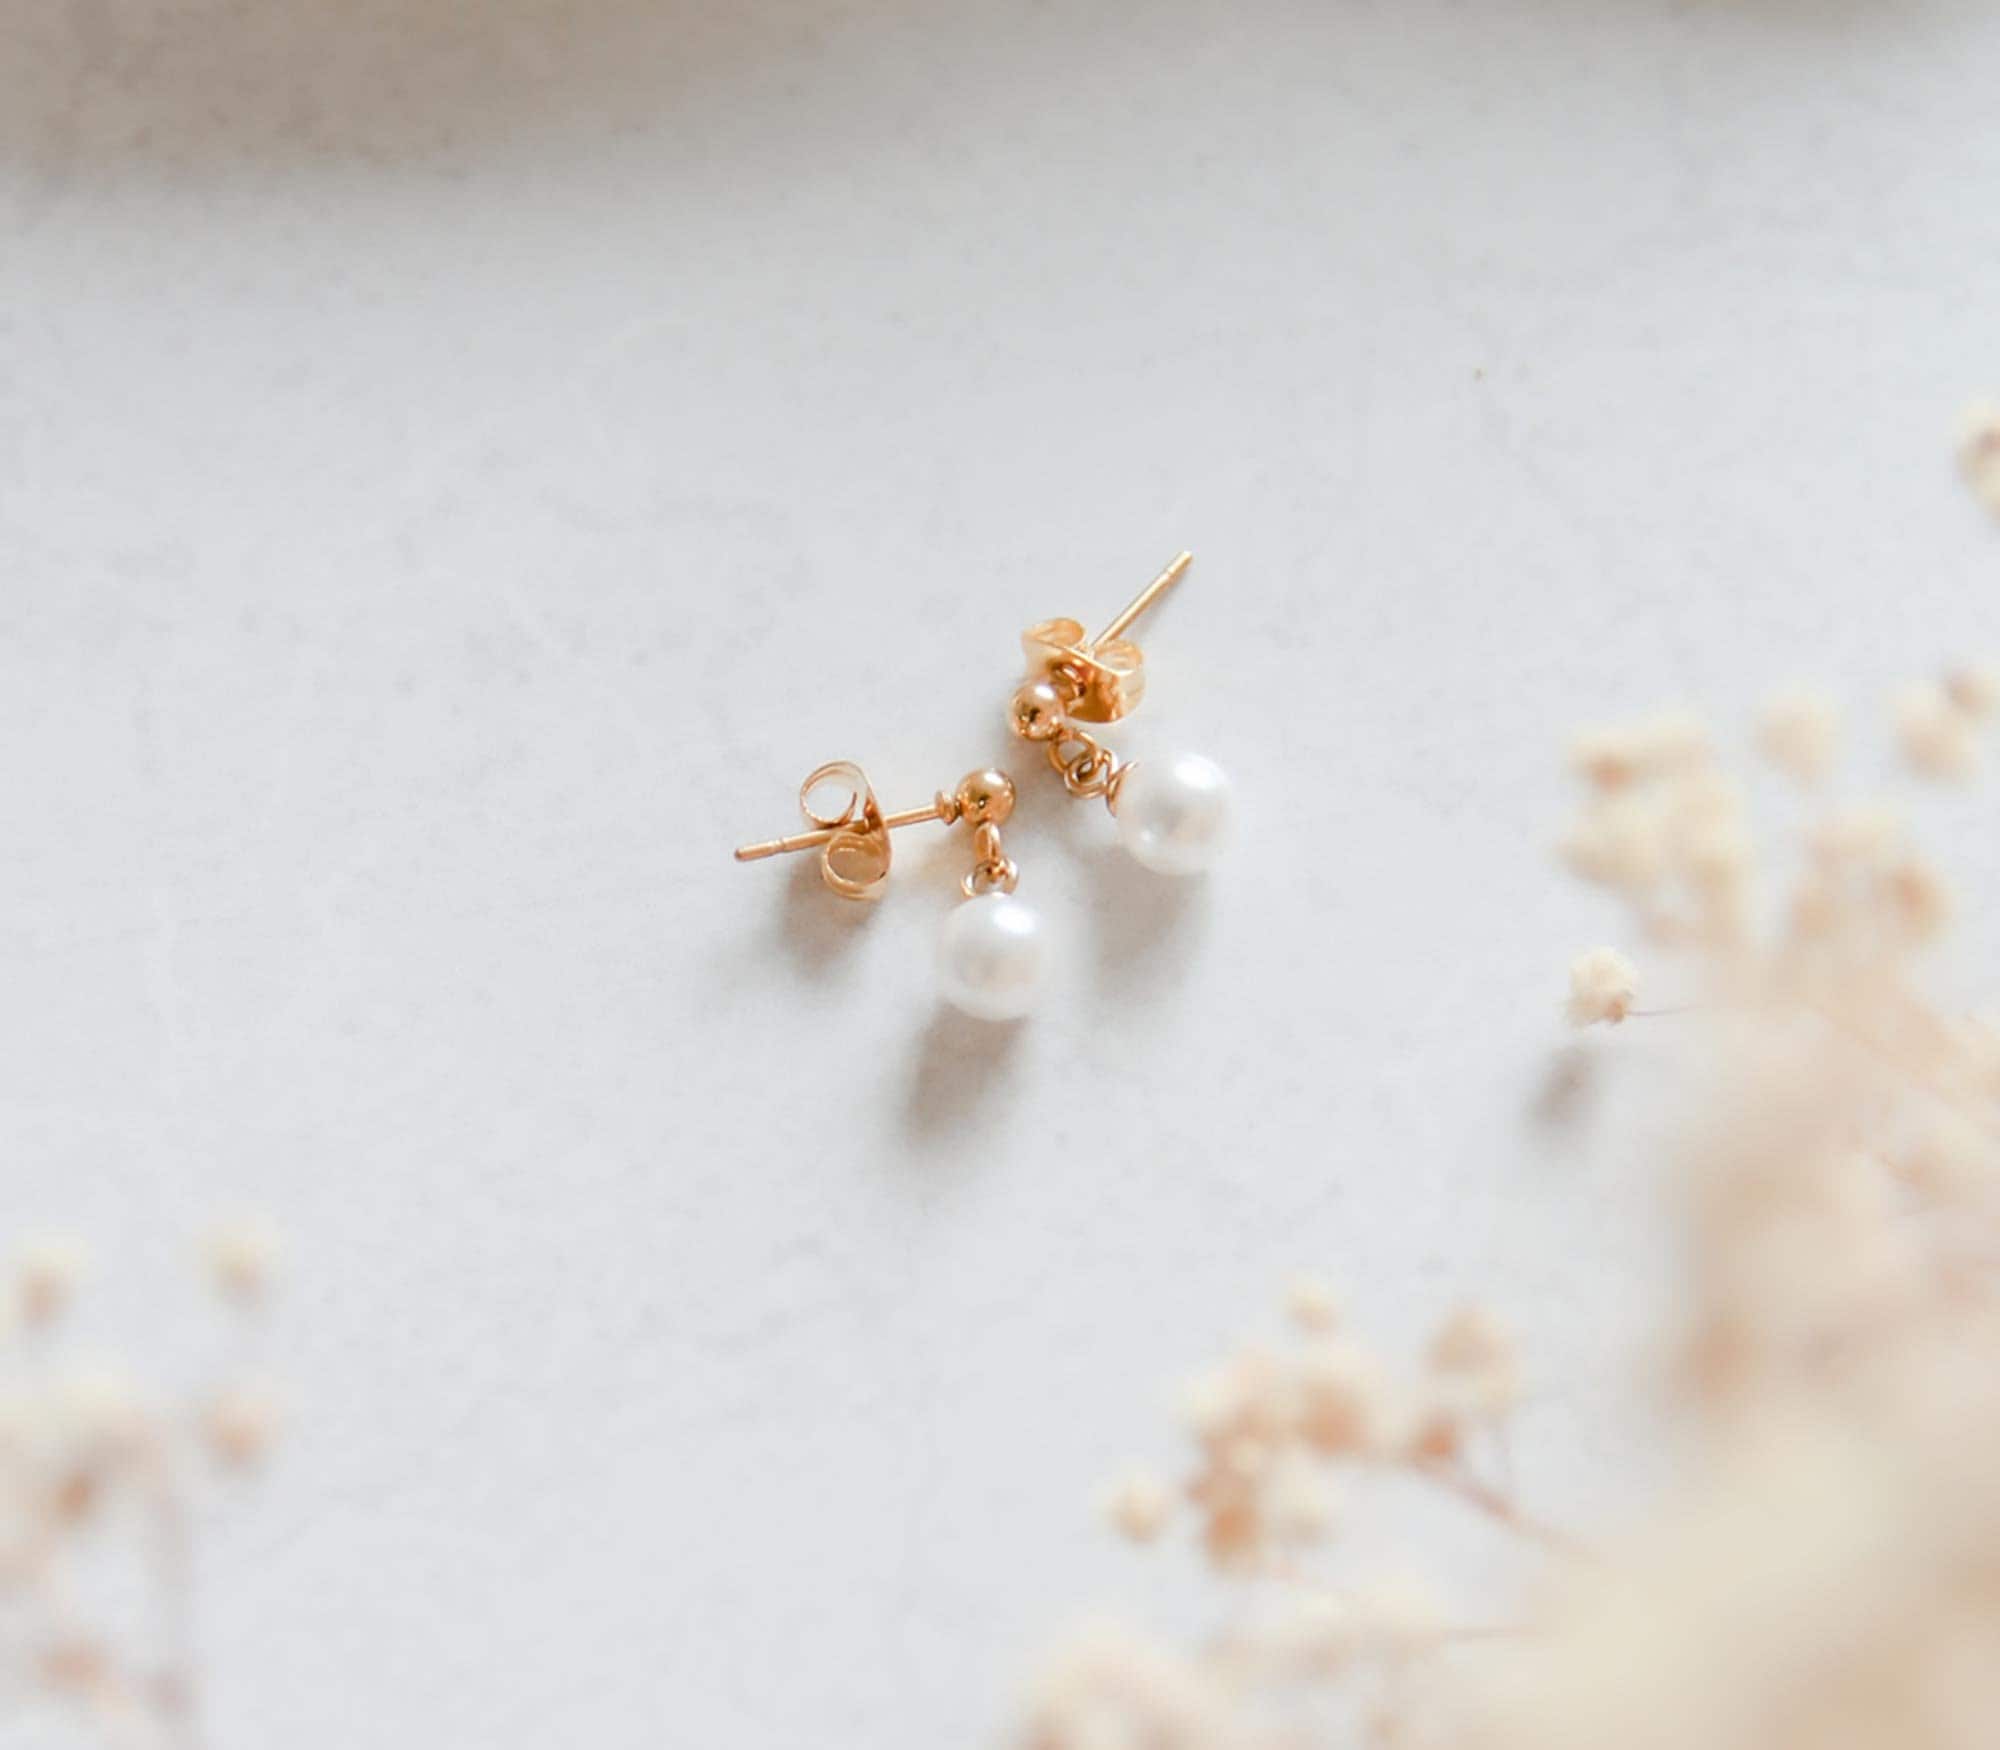 Tiny Stud Earrings, Screw Back Earrings, Small Studs, Sparly Cz Crystals,  Gold Stud Earrings, Cartilage Studs, 1.5mm, 2mm, 2.5mm, 3mm, 4mm 